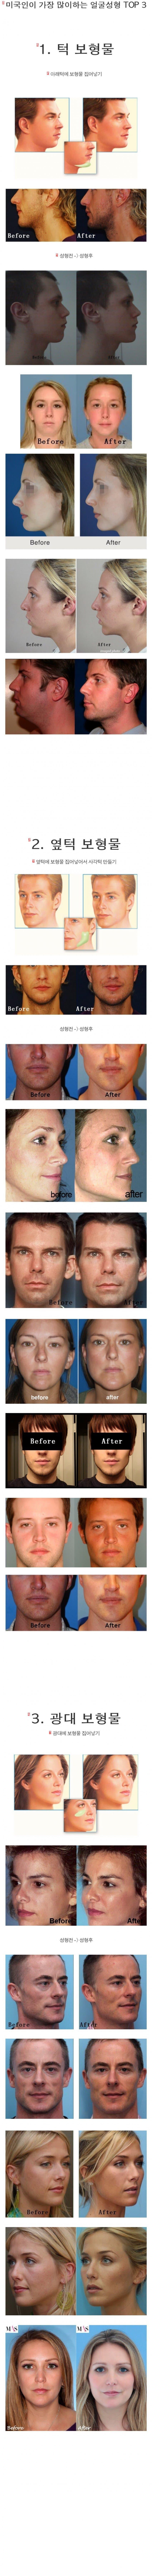 The most common facial plastic surgery Americans do.